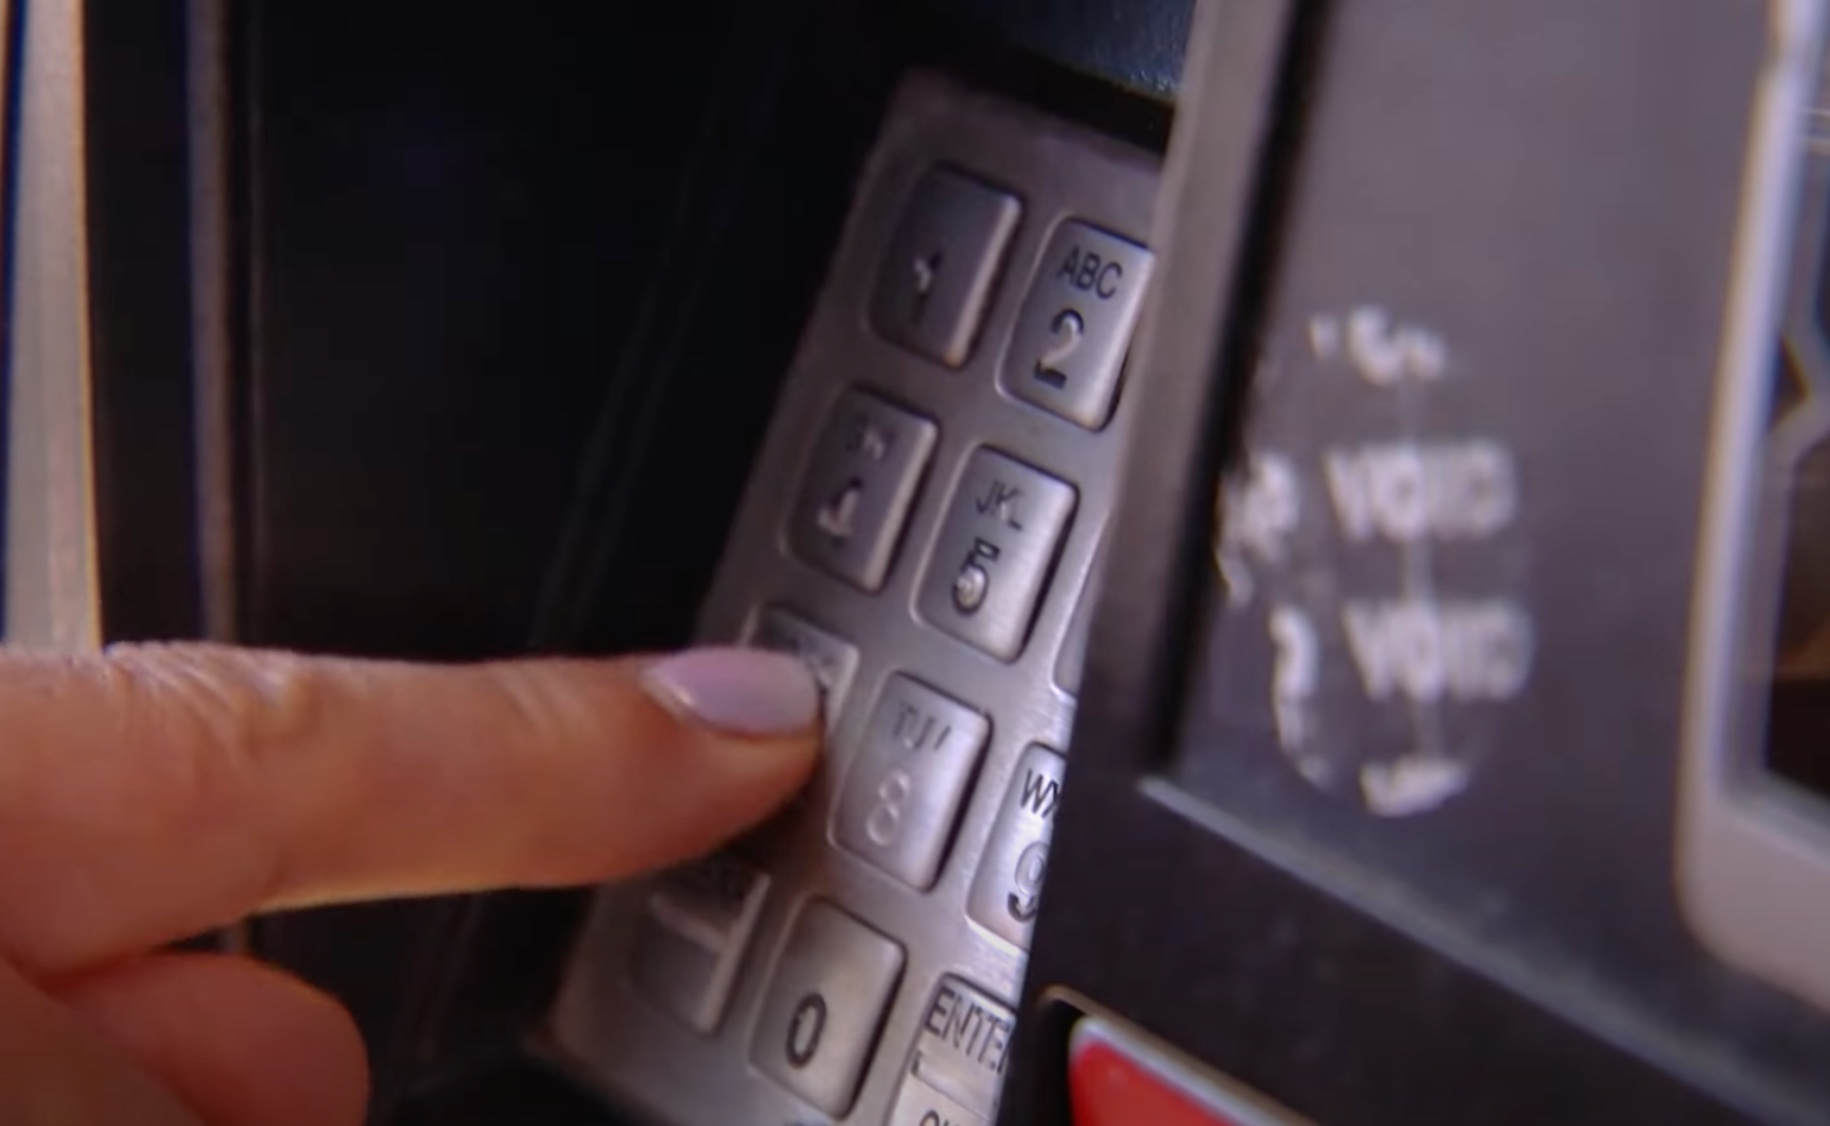 <p>Credit card skimmers are deceptive devices attached to point-of-sale terminals, enabling criminals to extract card information during transactions. These skimmers operate by capturing data from the magnetic stripe of your credit card as you swipe it. <br>  </p>